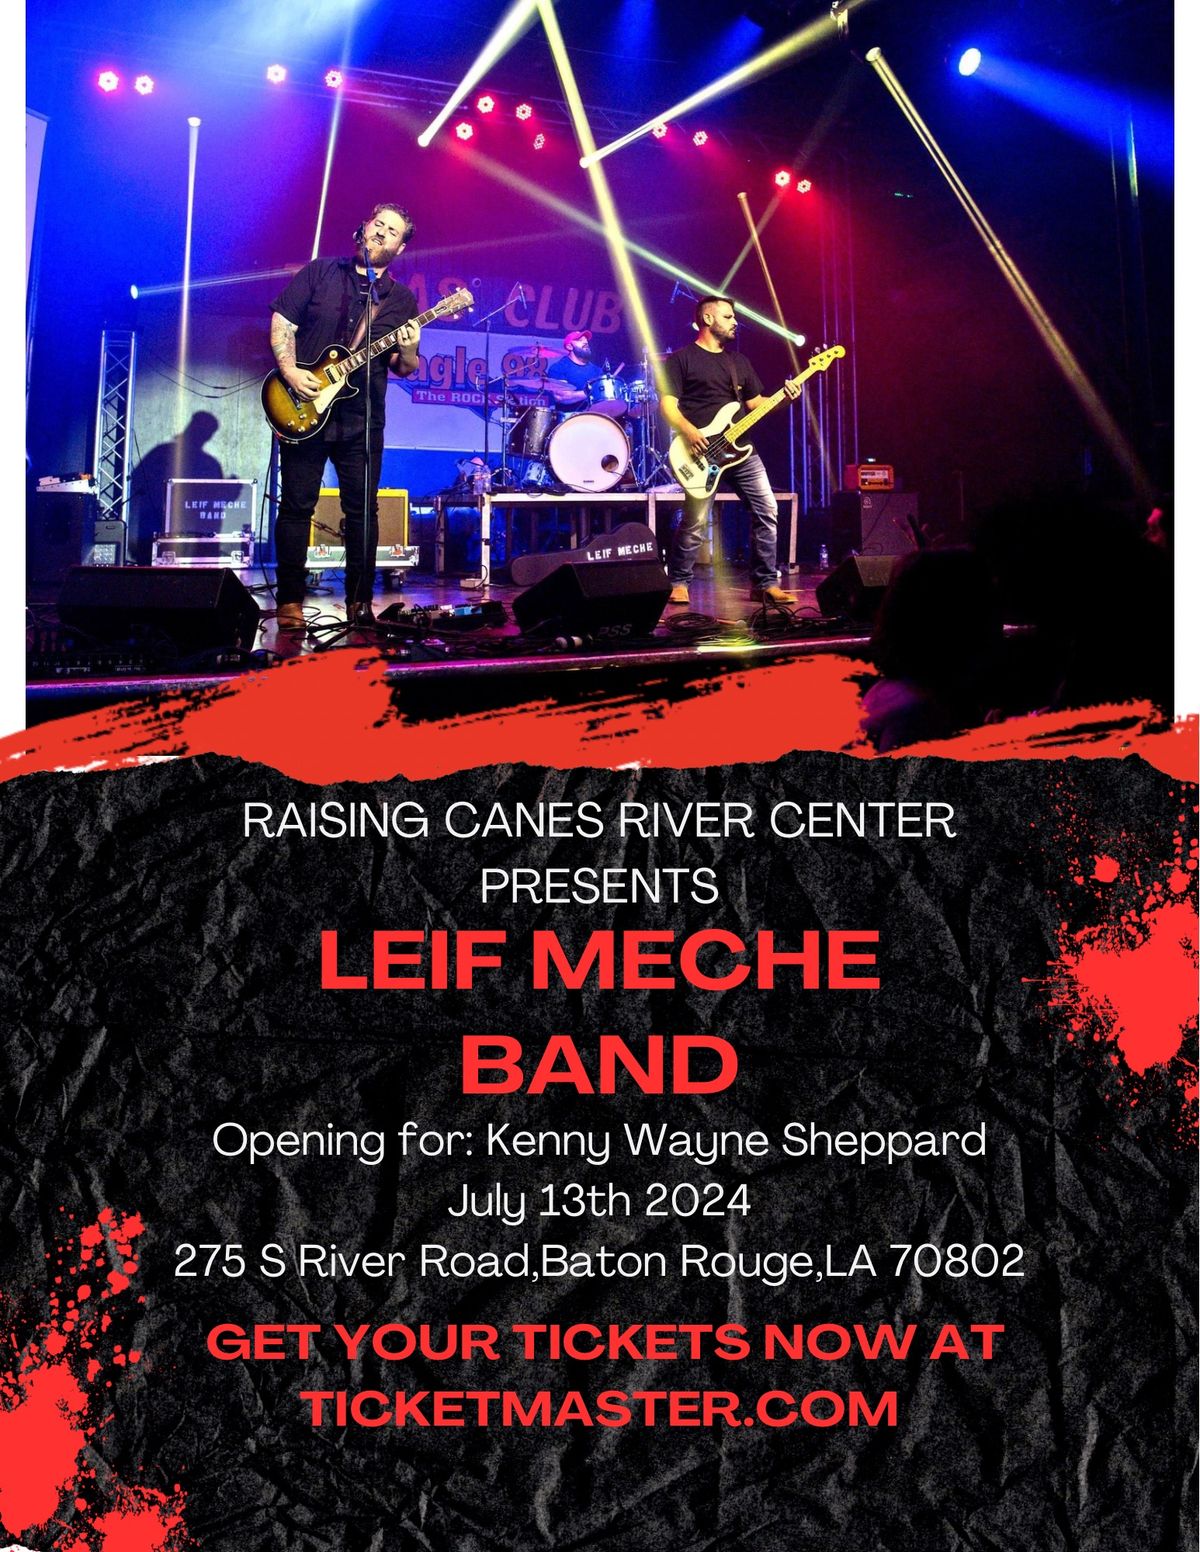 Leif Meche Band Opening for Kenny Wayne Sheppard